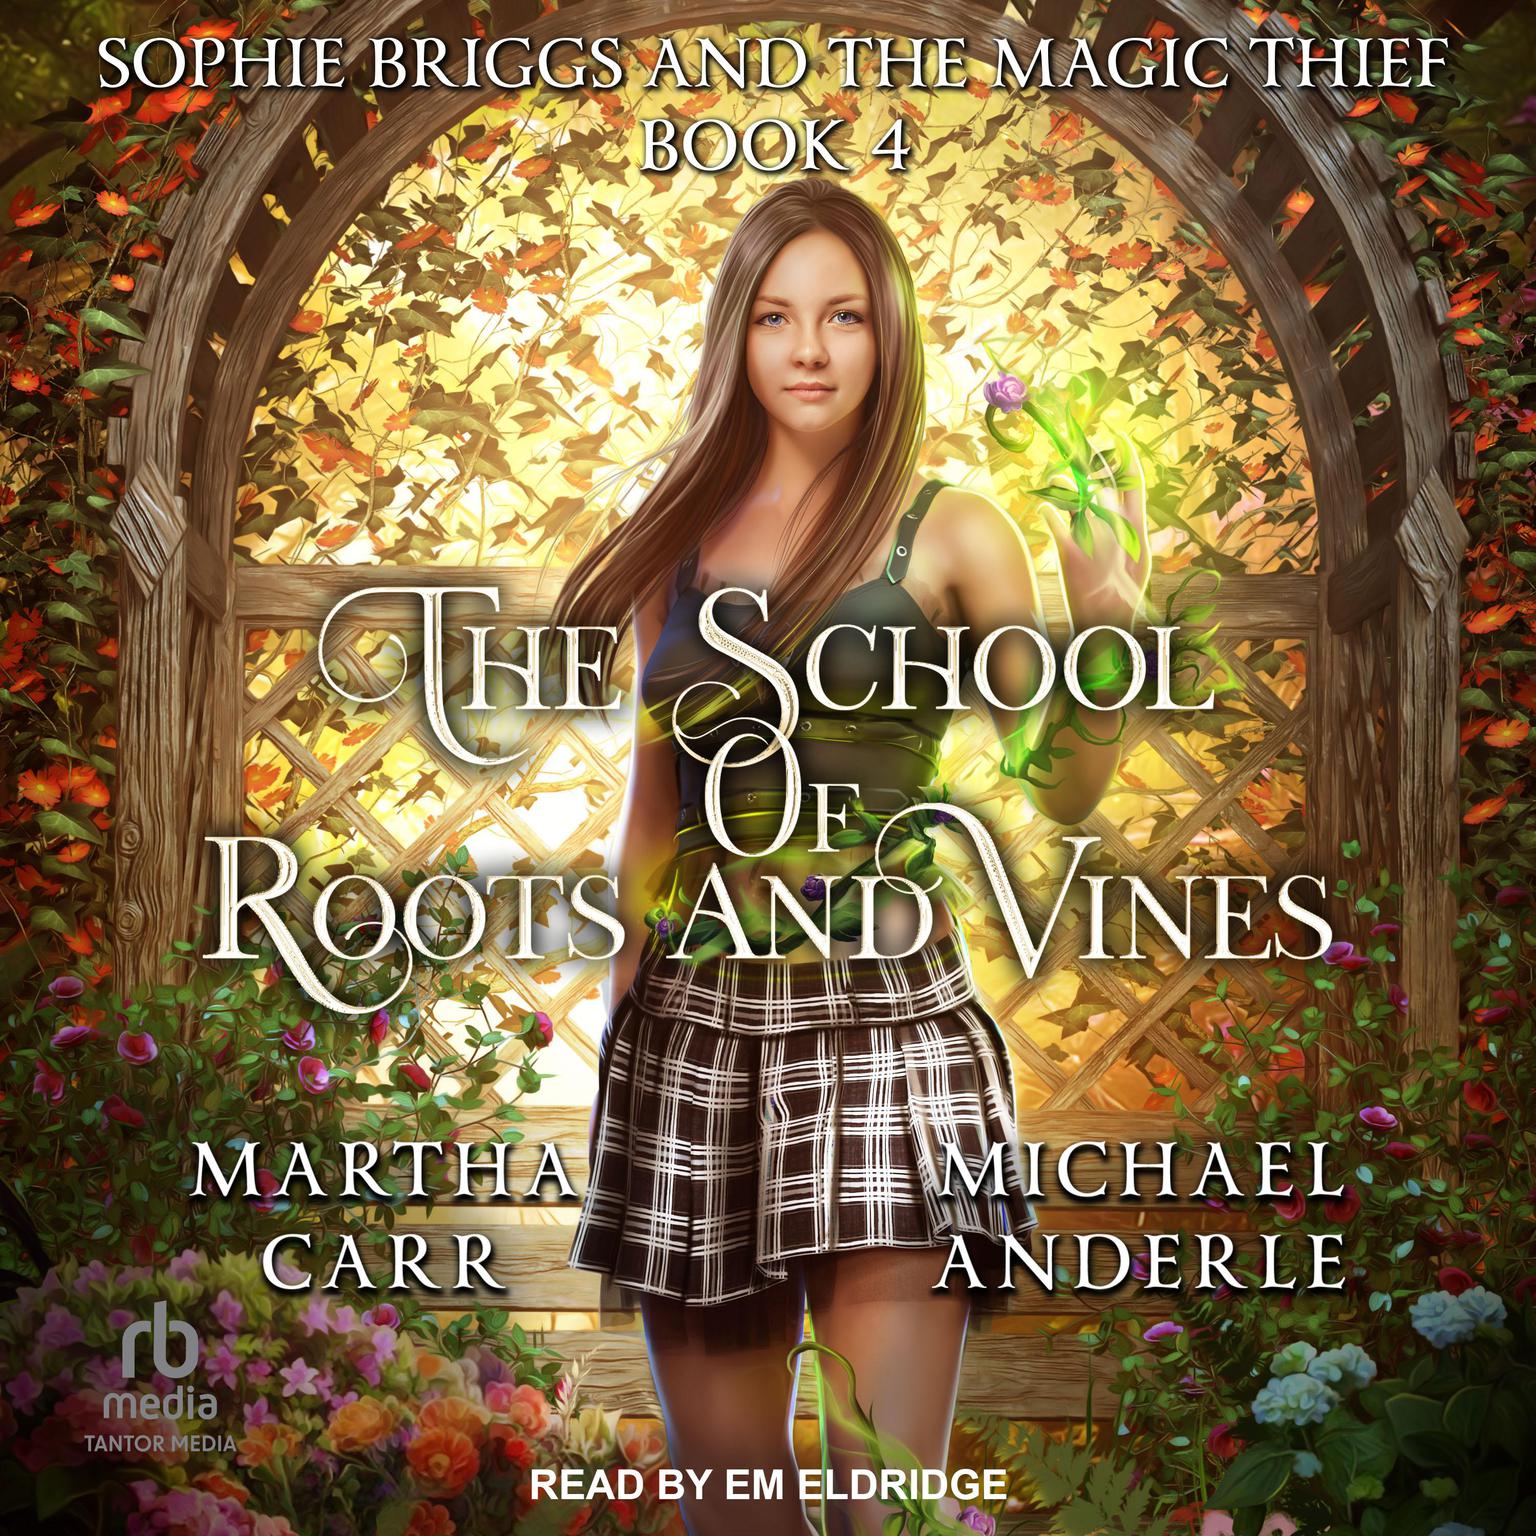 Sophie Briggs and the Magic Thief Audiobook, by Michael Anderle